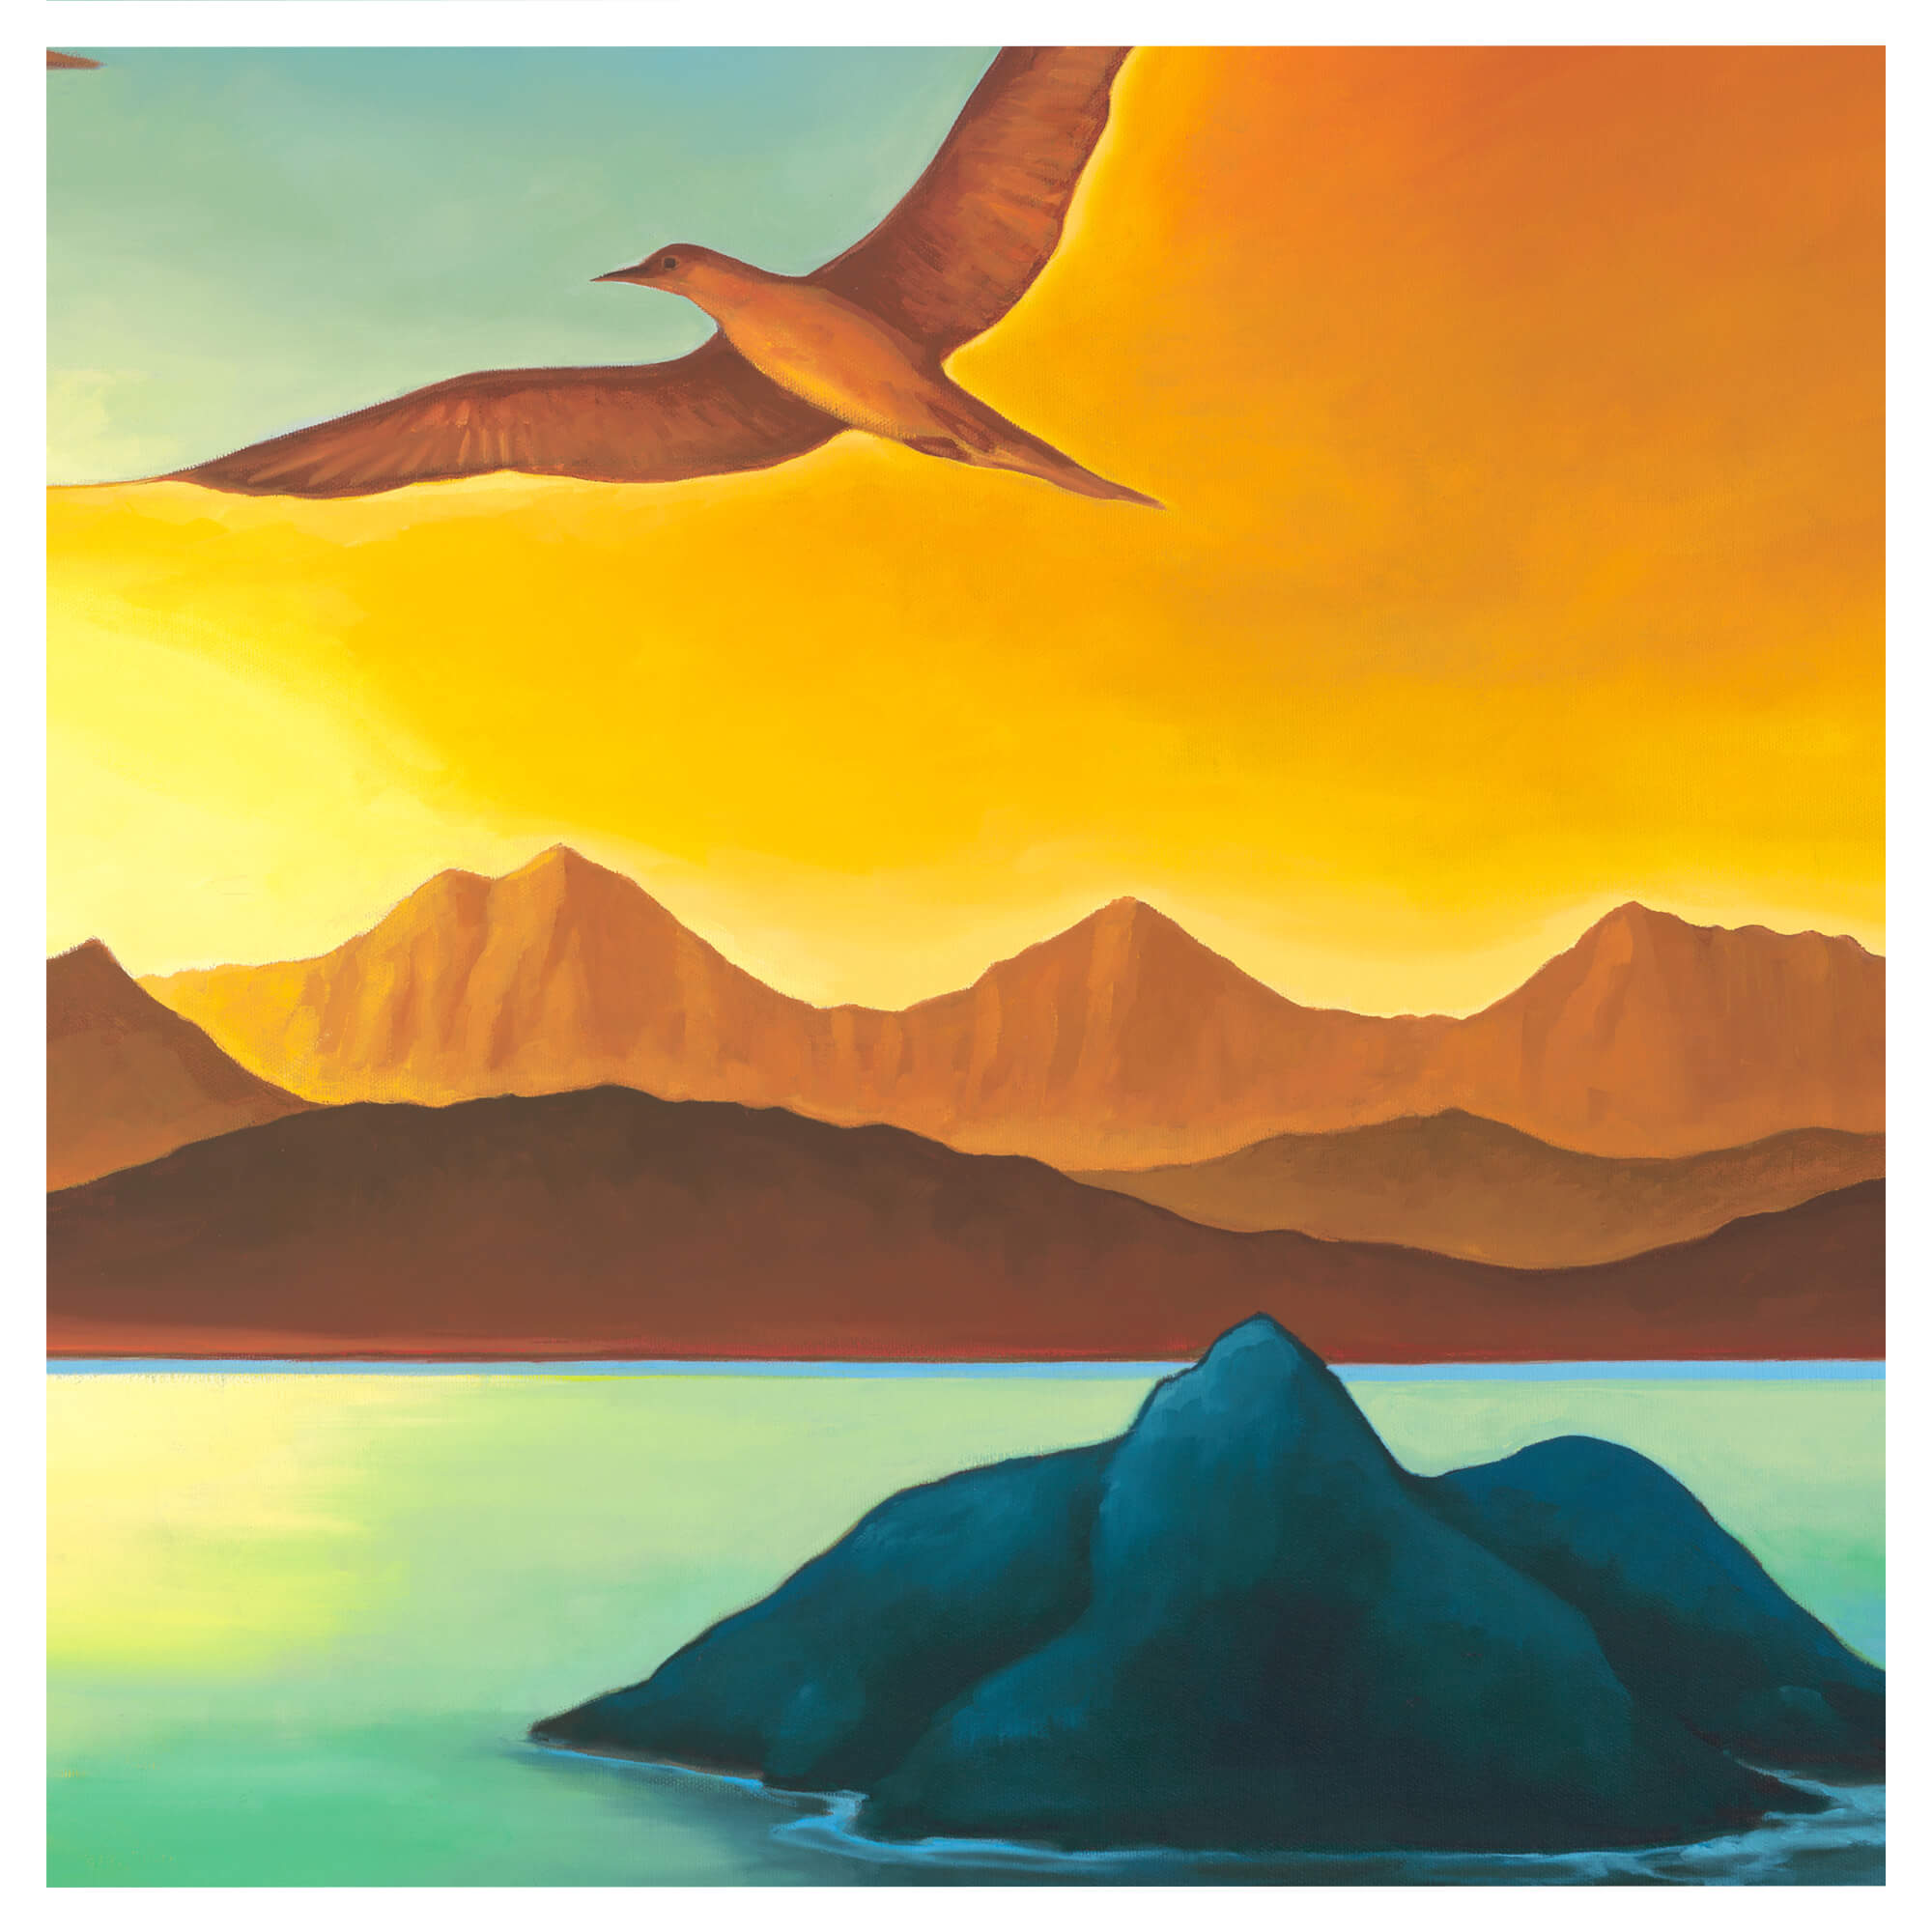 A bird and a tropical island background by Hawaii artist Colin Redican